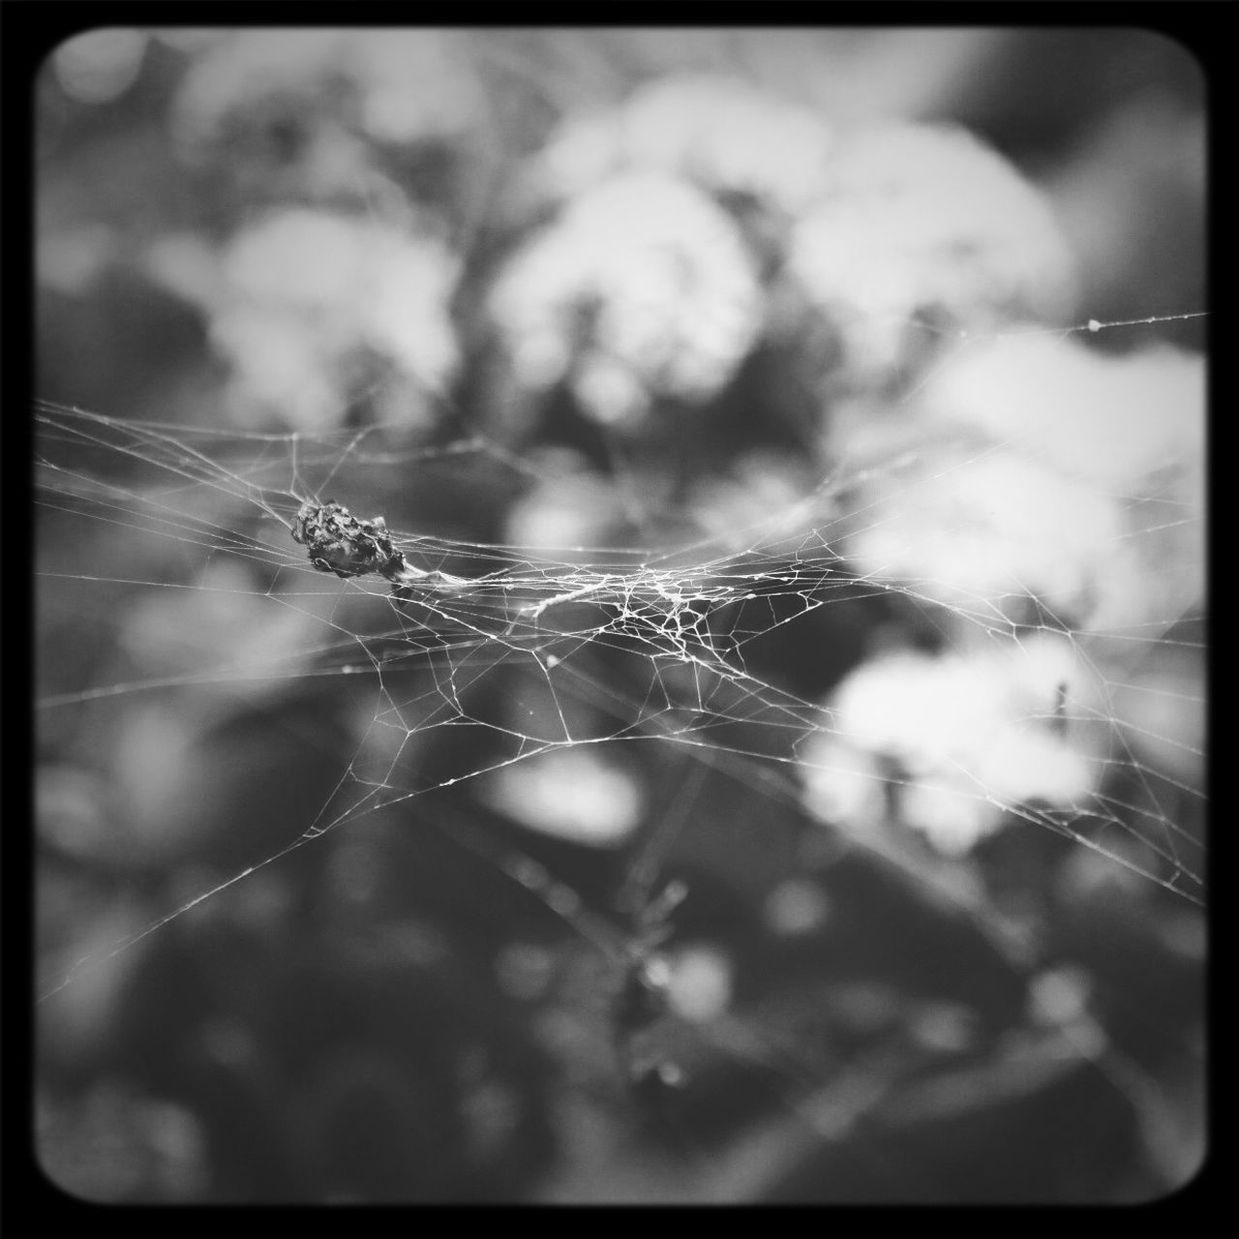 spider web, transfer print, animal themes, one animal, close-up, auto post production filter, focus on foreground, insect, spider, wildlife, animals in the wild, fragility, selective focus, nature, outdoors, day, no people, web, plant, natural pattern